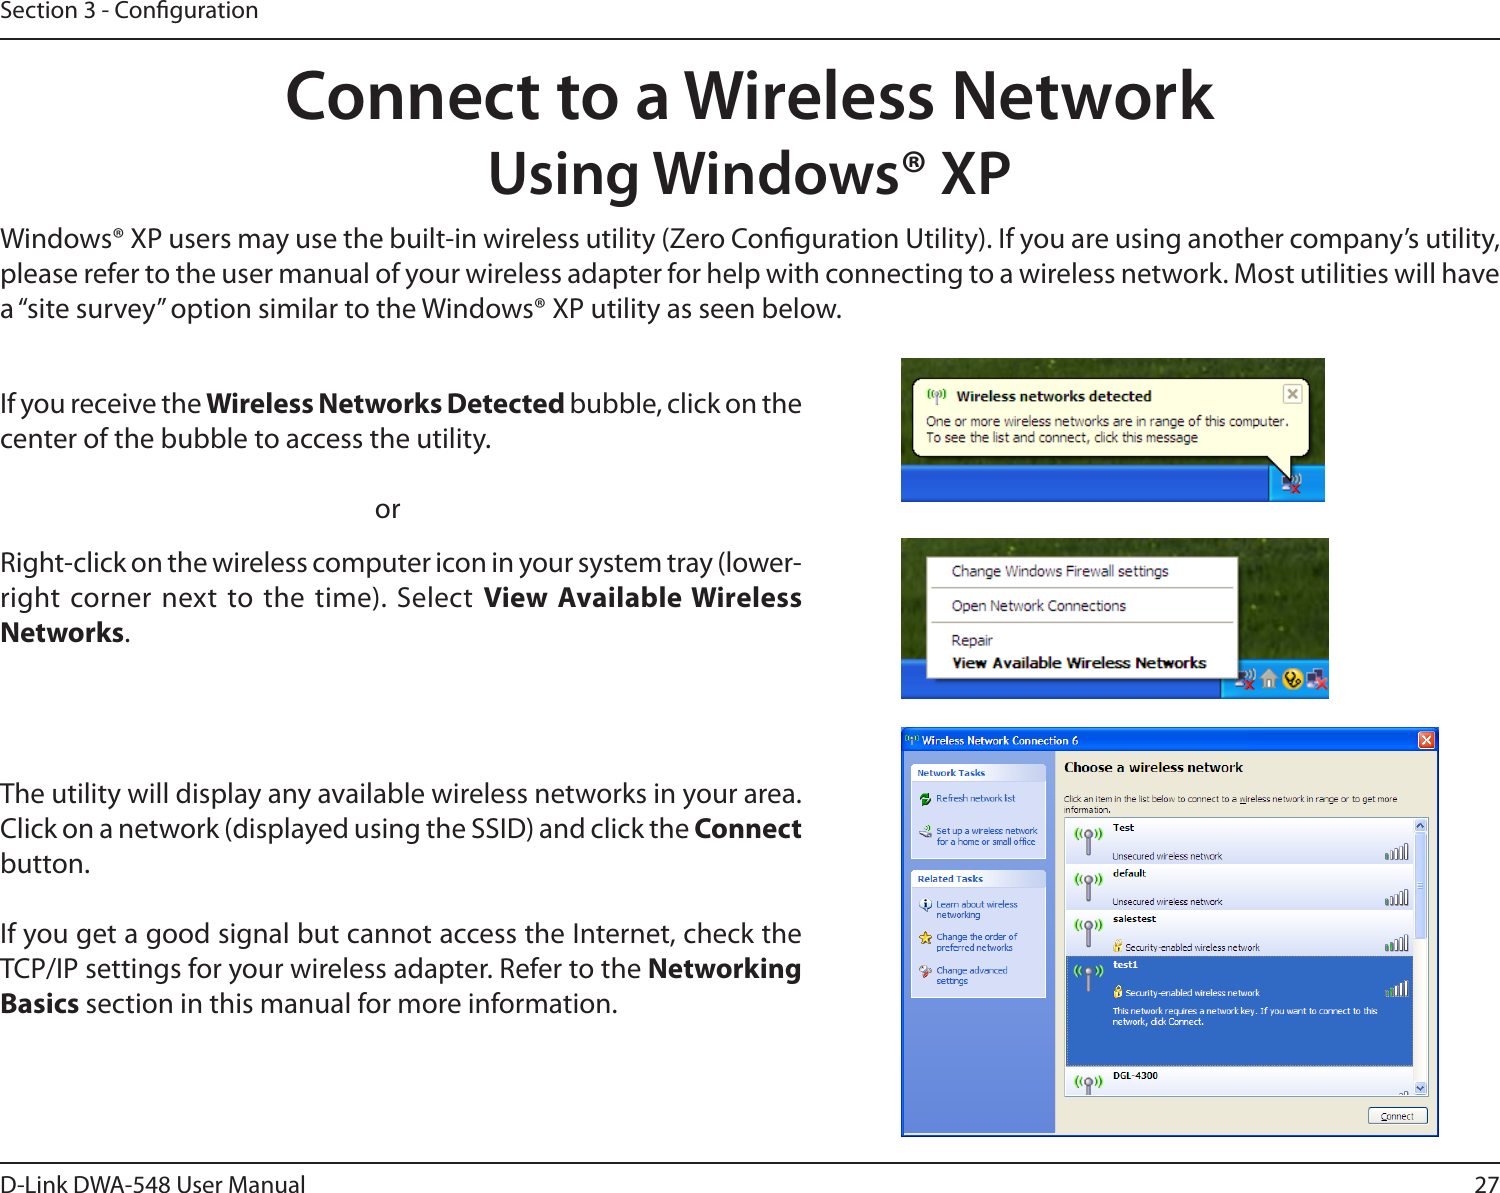 27D-Link DWA-548 User ManualSection 3 - CongurationConnect to a Wireless NetworkUsing Windows® XPWindows® XP users may use the built-in wireless utility (Zero Conguration Utility). If you are using another company’s utility, please refer to the user manual of your wireless adapter for help with connecting to a wireless network. Most utilities will have a “site survey” option similar to the Windows® XP utility as seen below.Right-click on the wireless computer icon in your system tray (lower-right corner next to the time). Select  View Available Wireless Networks.If you receive the Wireless Networks Detected bubble, click on the center of the bubble to access the utility.     orThe utility will display any available wireless networks in your area. Click on a network (displayed using the SSID) and click the Connect button.If you get a good signal but cannot access the Internet, check the TCP/IP settings for your wireless adapter. Refer to the Networking Basics section in this manual for more information.